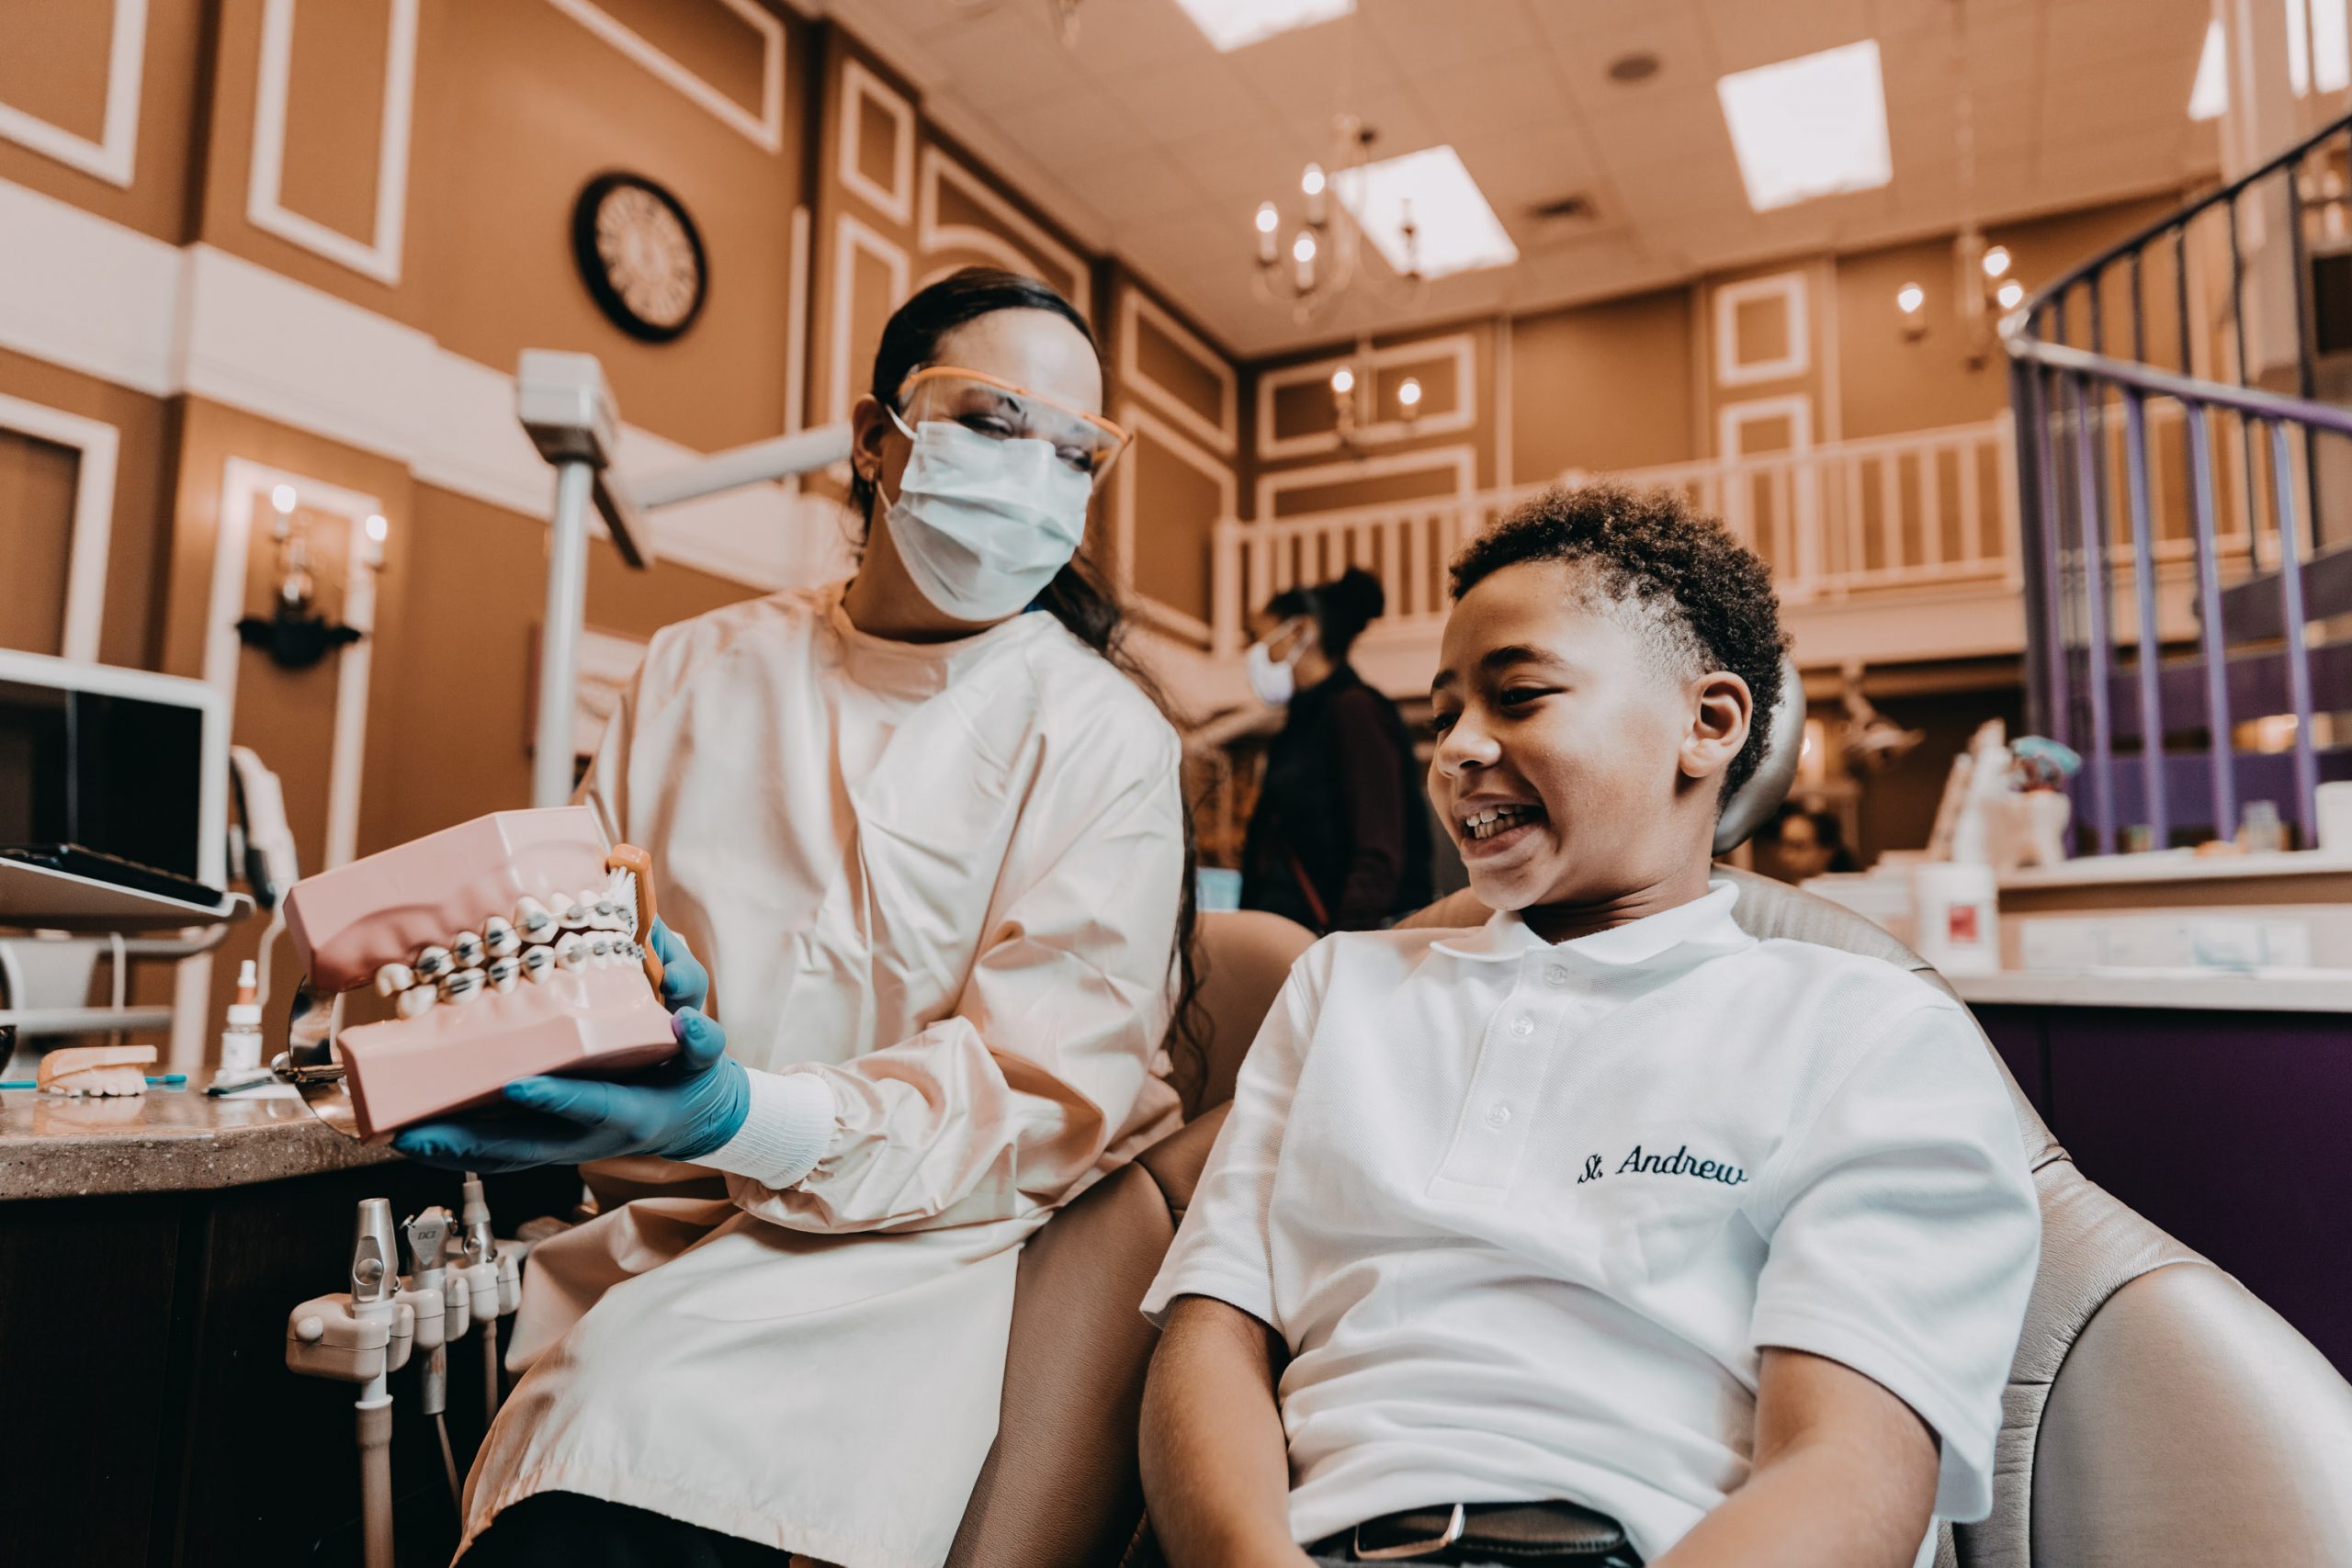  Female pediatric dental specialist shows young black male dental patient a large model of a mouth. 